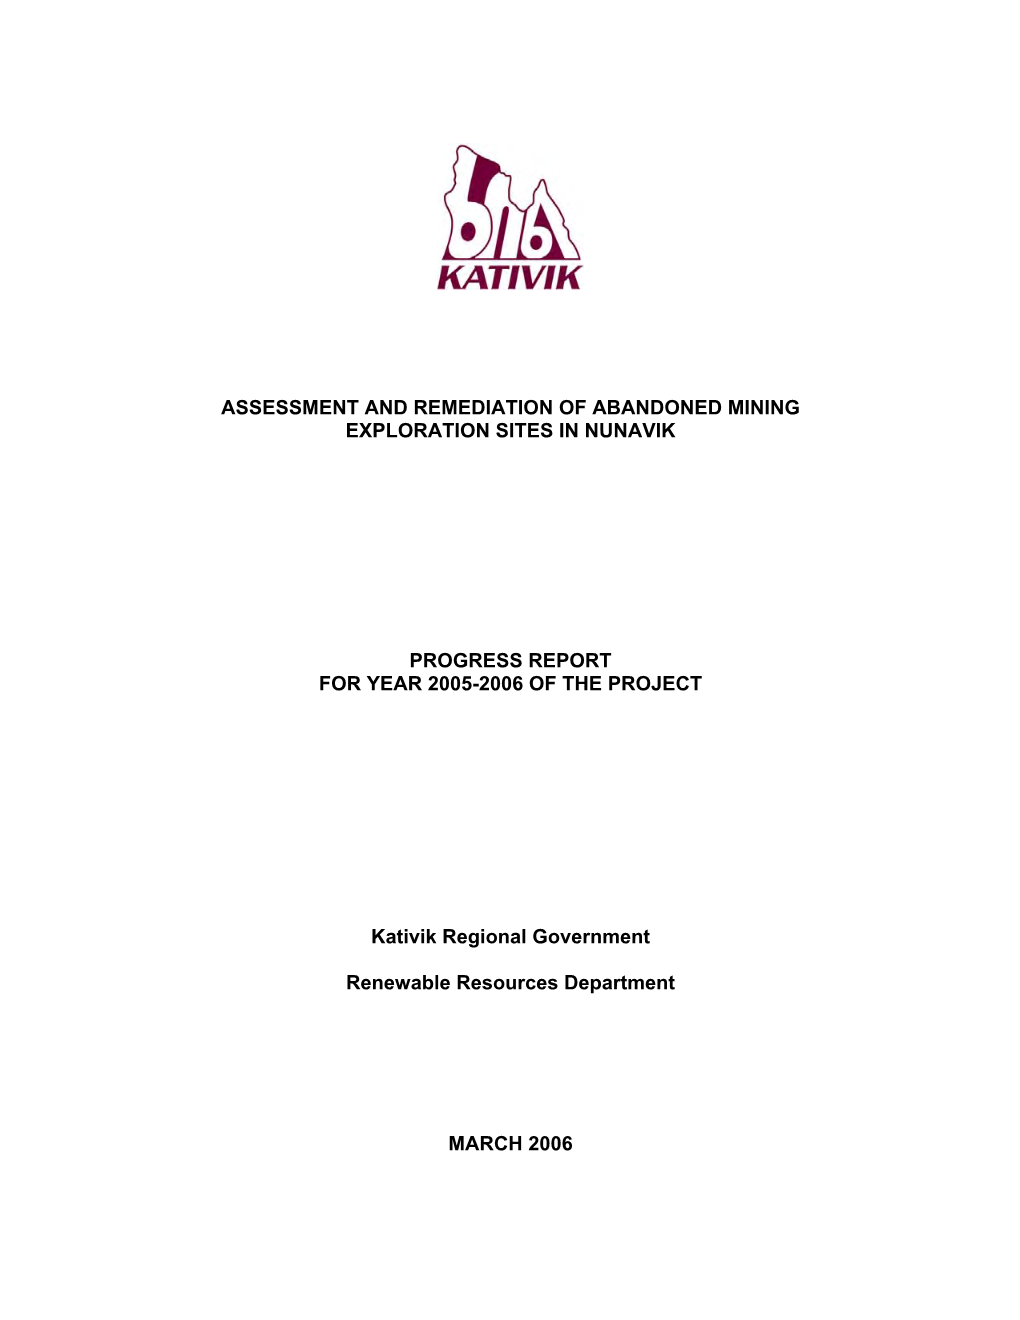 ASSESSMENT and REMEDIATION of ABANDONED MINING EXPLORATION SITES in NUNAVIK PROGRESS REPORT for YEAR 2005-2006 of the PROJECT Ka